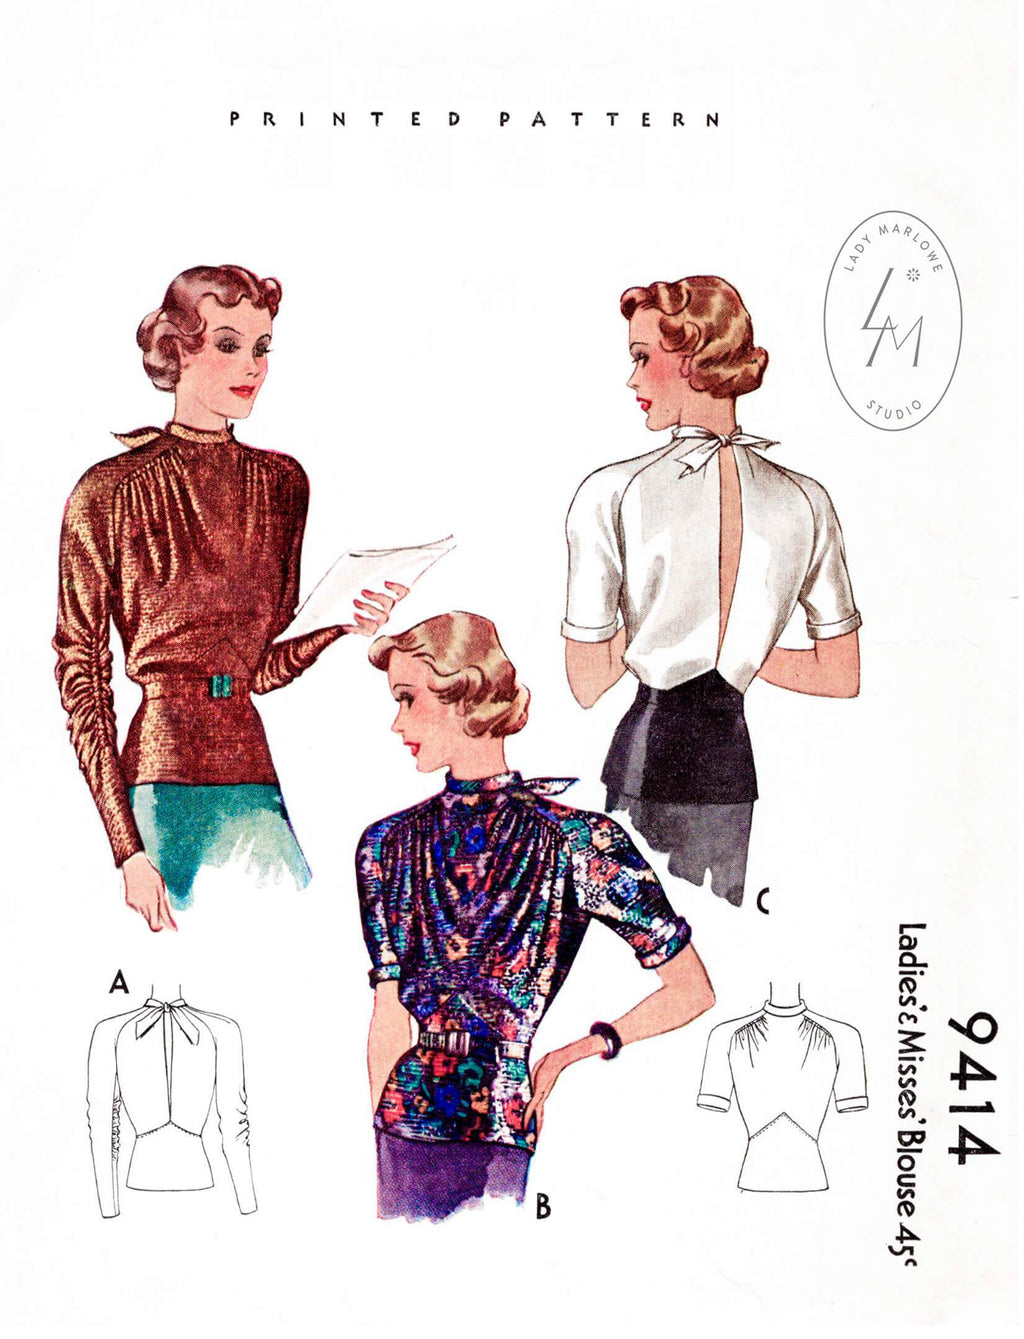 McCall 9414 1930s vintage sewing pattern women's blouse